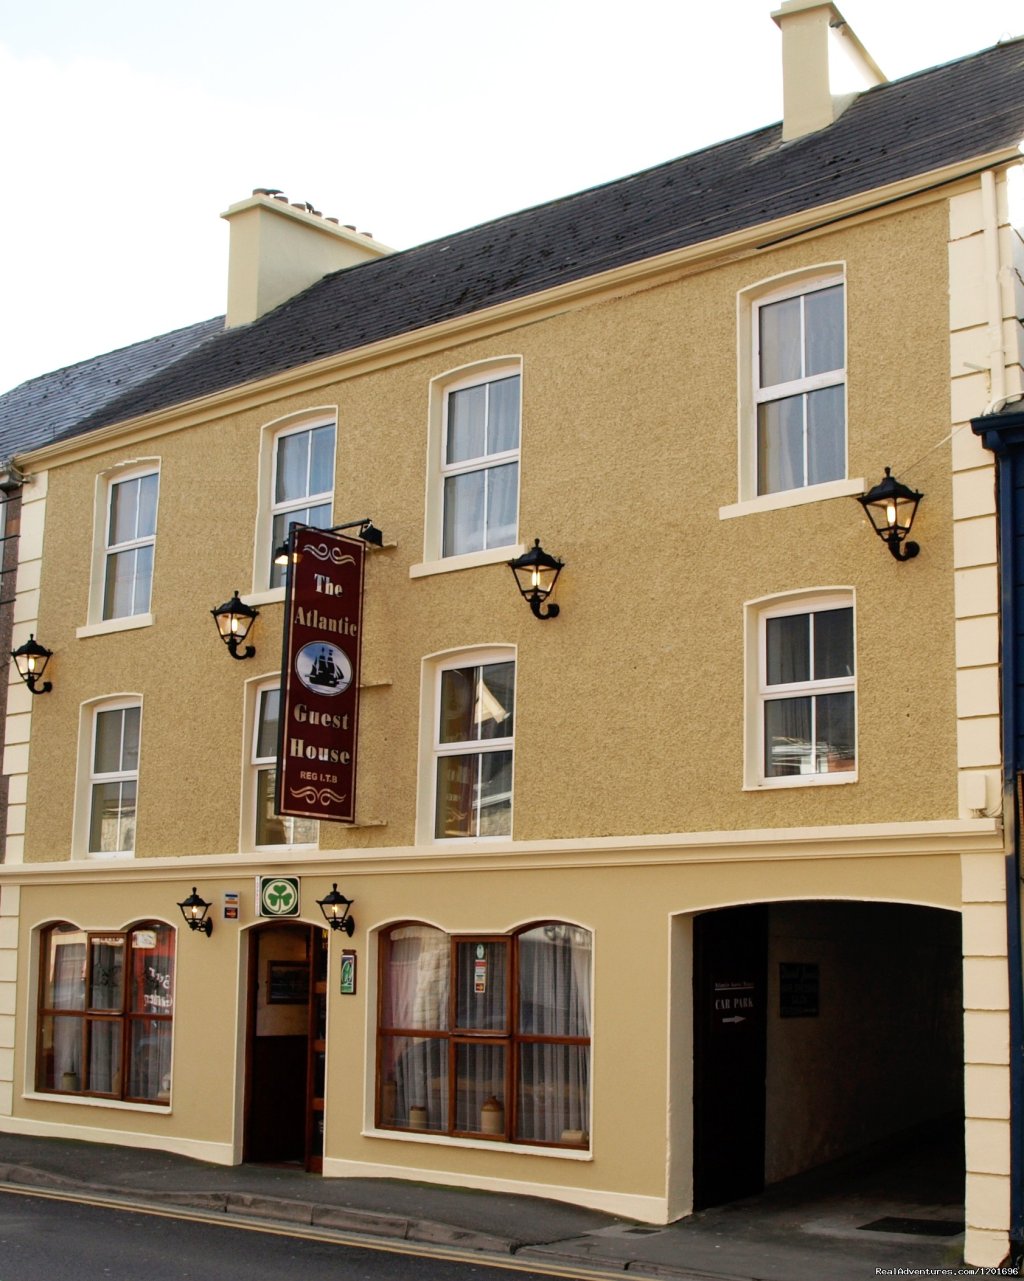 Atlantic Guesthouse | donegal town , Ireland | Bed & Breakfasts | Image #1/5 | 